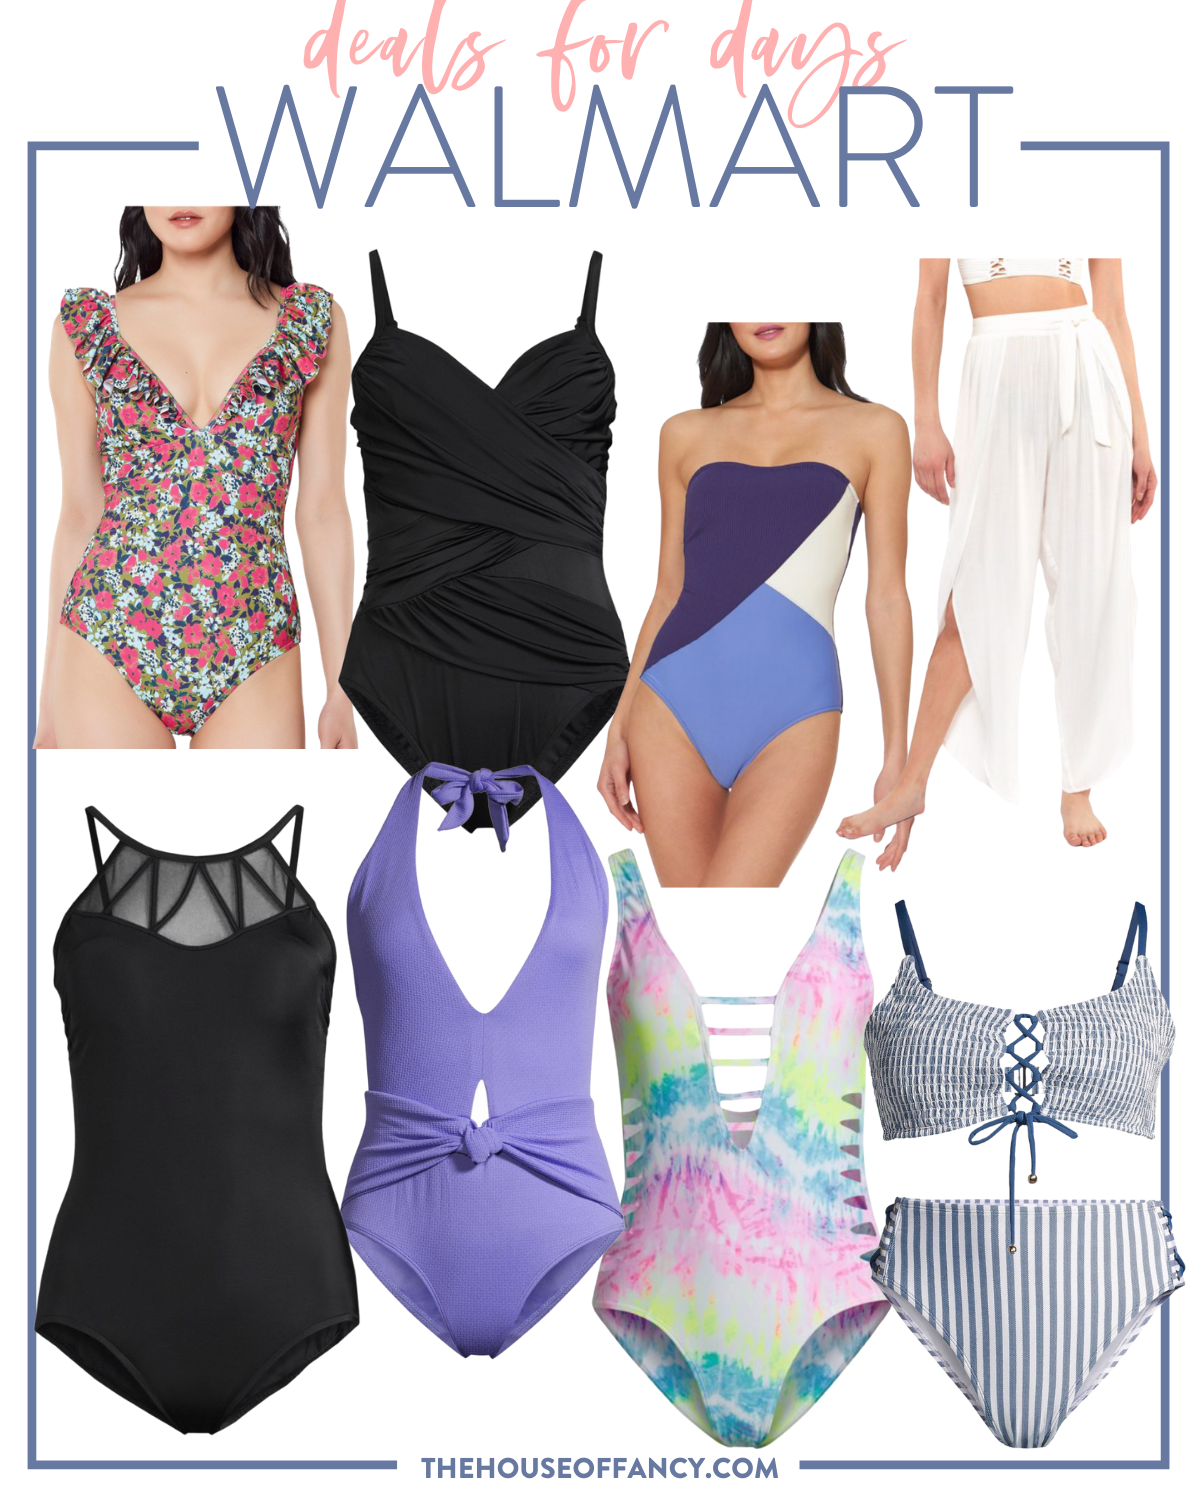 Walmart Deals for Days by popular Houston fashion blog, The House of Fancy: collage image of a floral print ruffle neck one piece swimsuit, black one piece swimsuit, color block strapless one piece, linen tie waist pants, purple halter one piece swim suit, rainbow tie dye cute out one piece swimsuit, and grey and white stripe two piece swimsuit. 